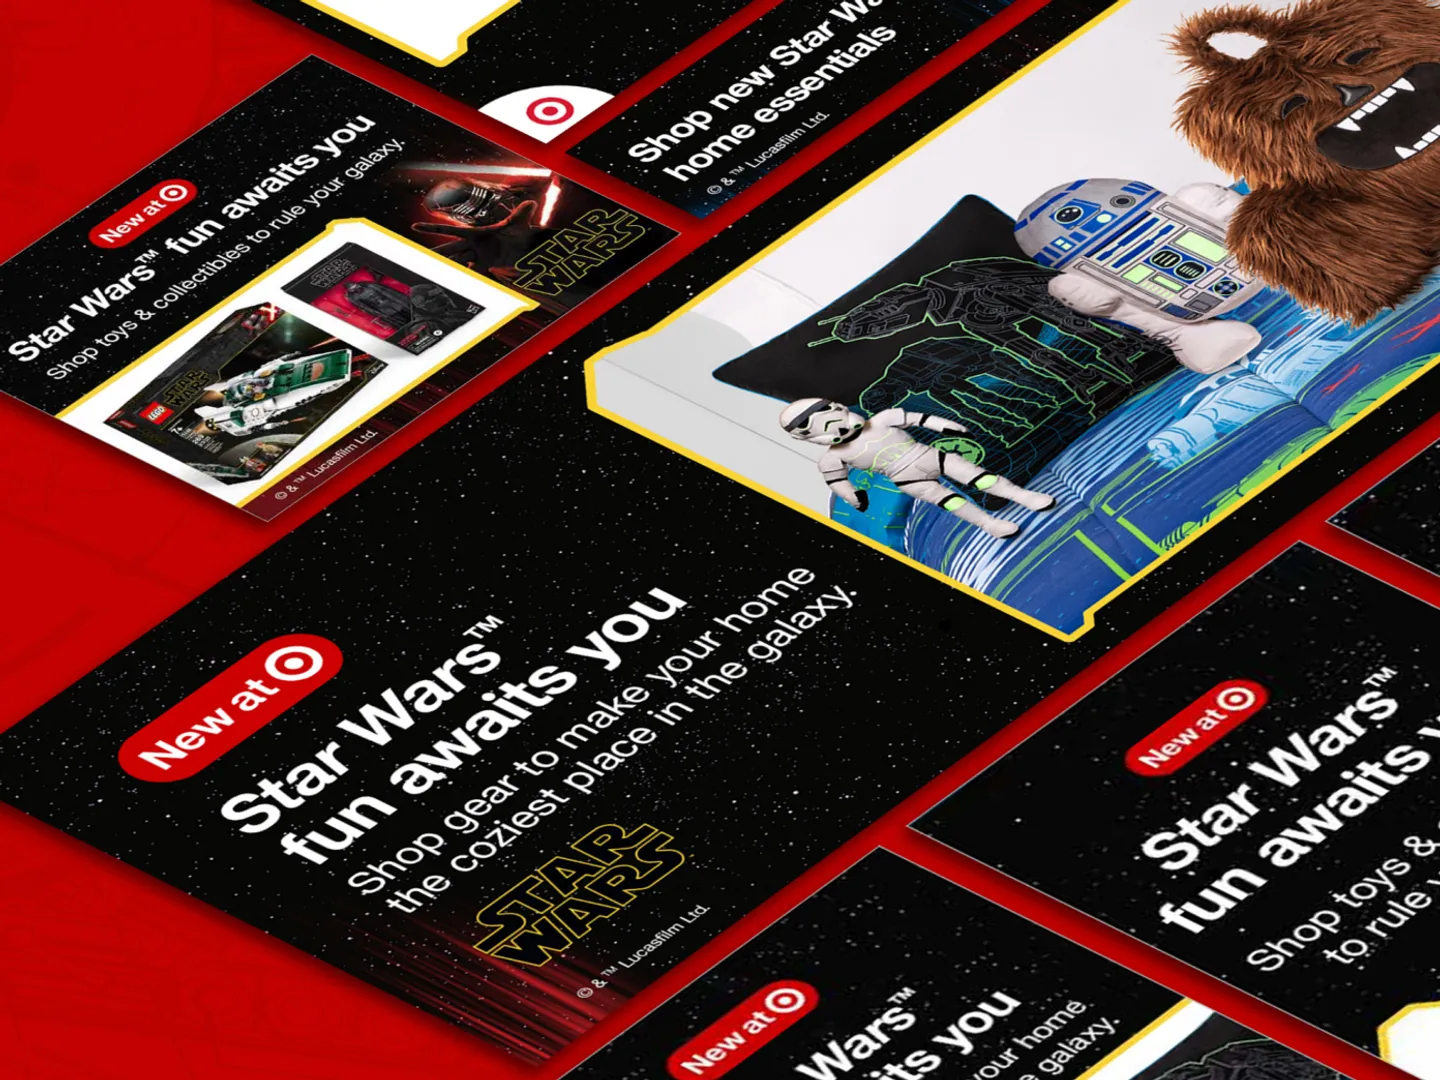 Composite images of display ads and placements featuring Star Wars products